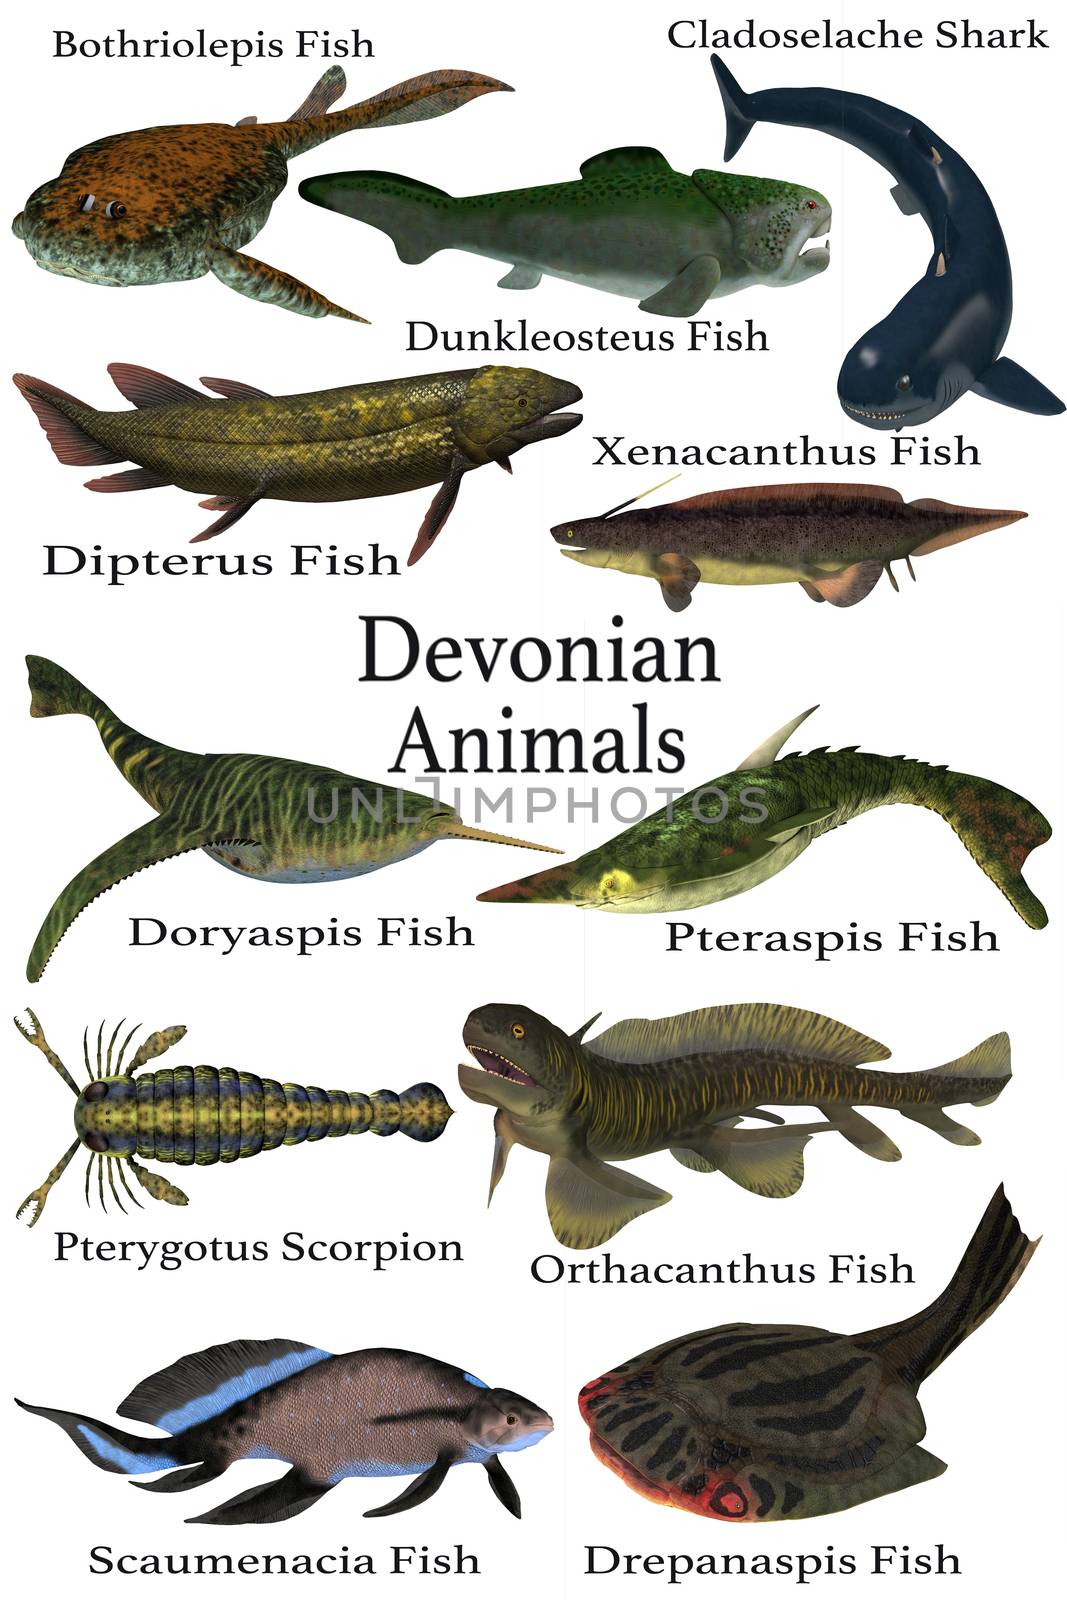 A collection of various aquatic animals that lived during the Devonian Period of Earth's history.